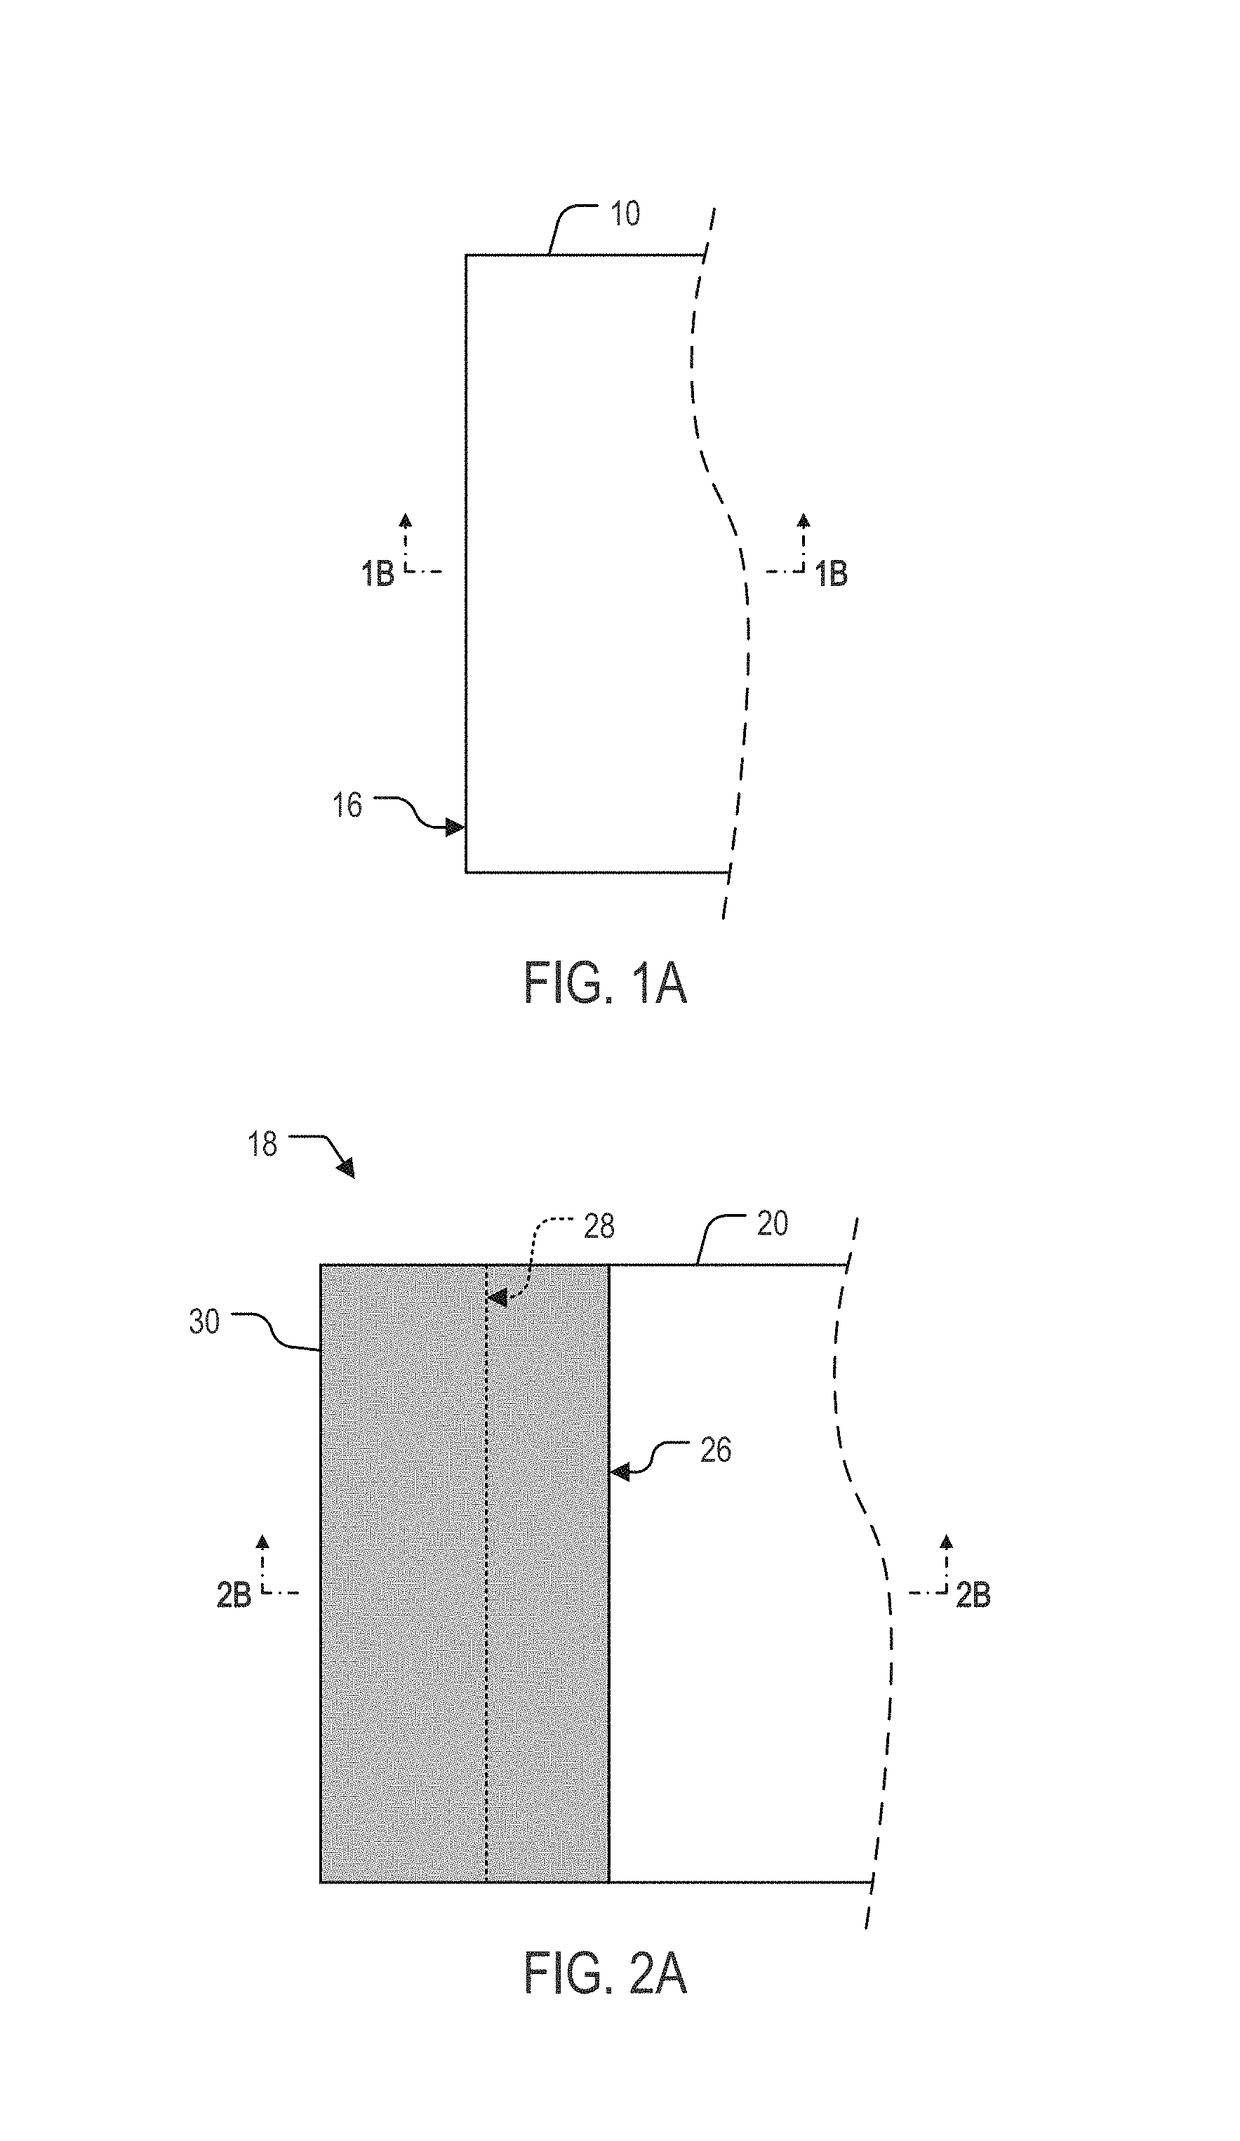 Attachment method for laminate structures